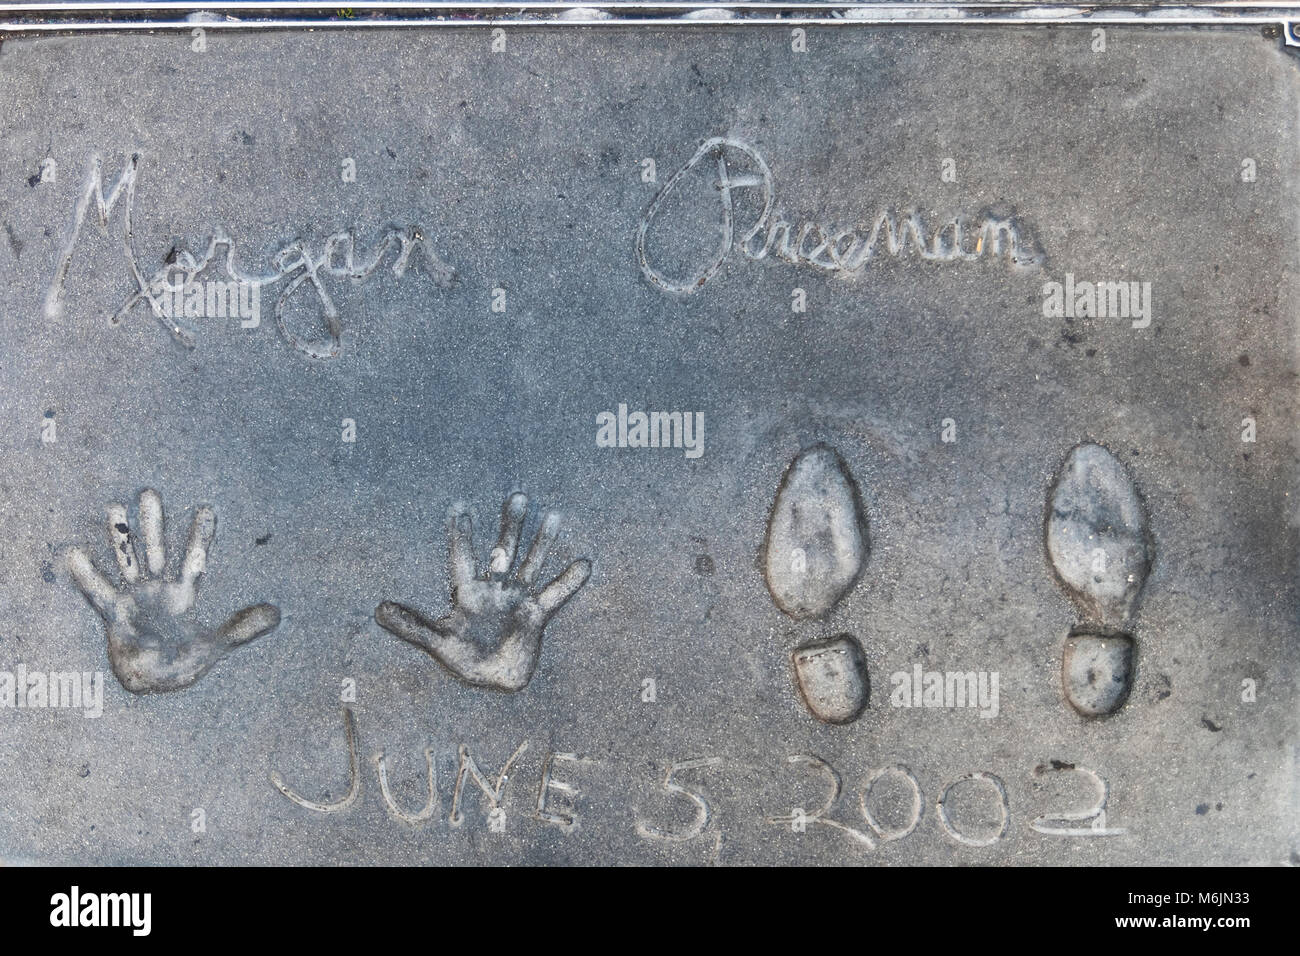 HOLLYWOOD, CALIFORNIA - JULY 19, 2007: Handprints and footprints of the famous american actor Morgan Freeman on the ground behind the TCL Grauman's Ch Stock Photo